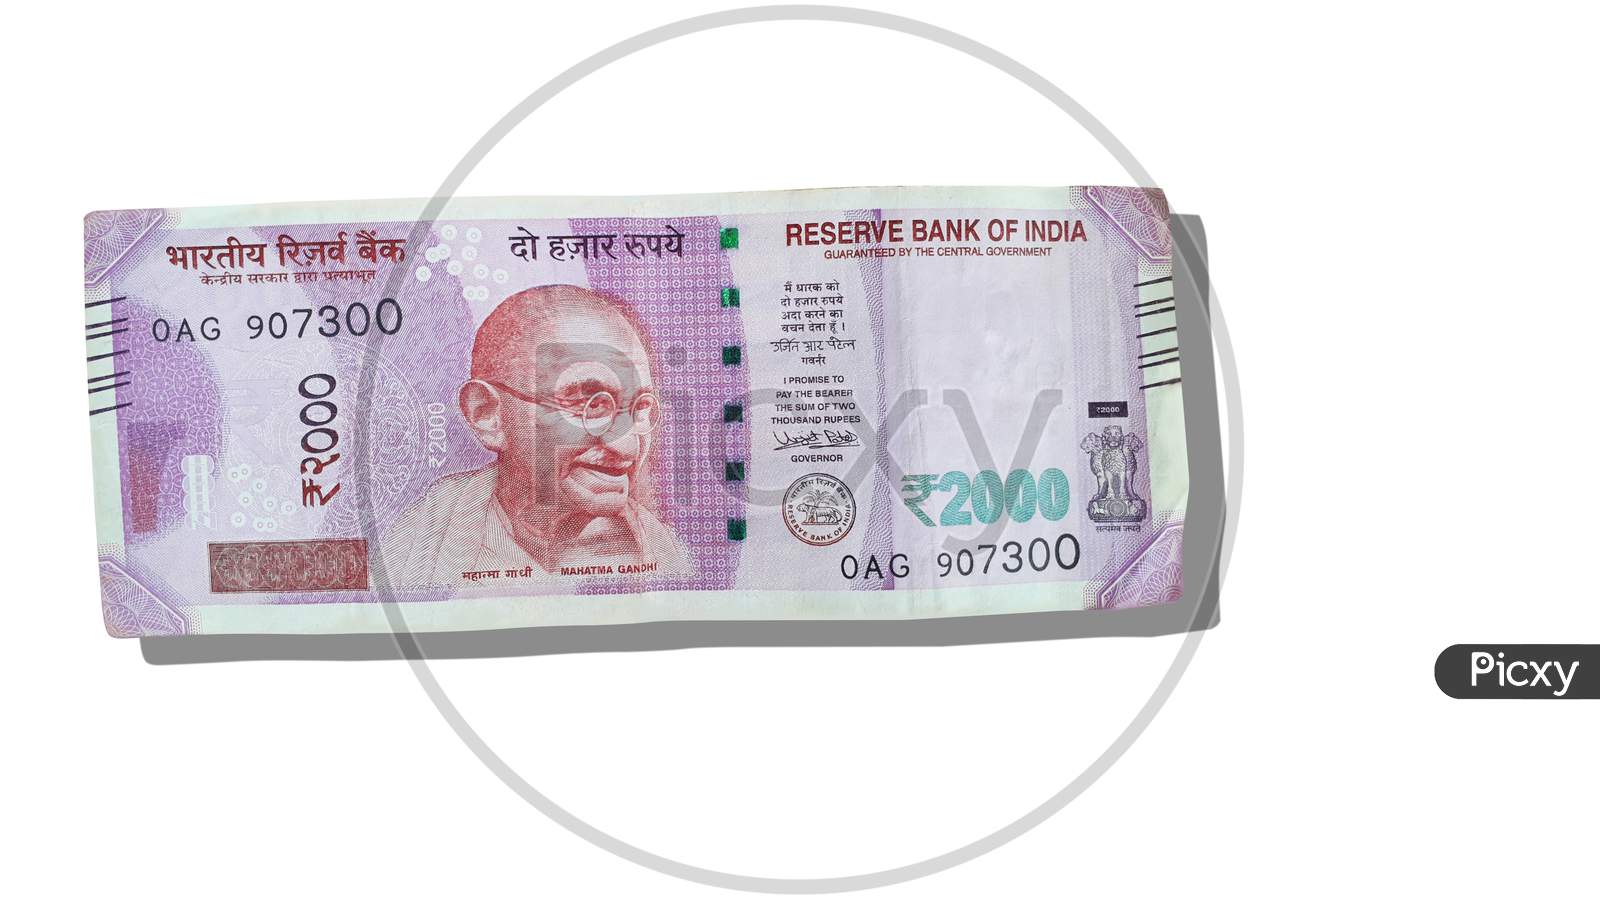 Indian currency note of 2000 rupees, with the photo printed of Mahatma Gandhi on it -isolated image. The Reserve Bank of India Indian (RBI) launches the currency notes.